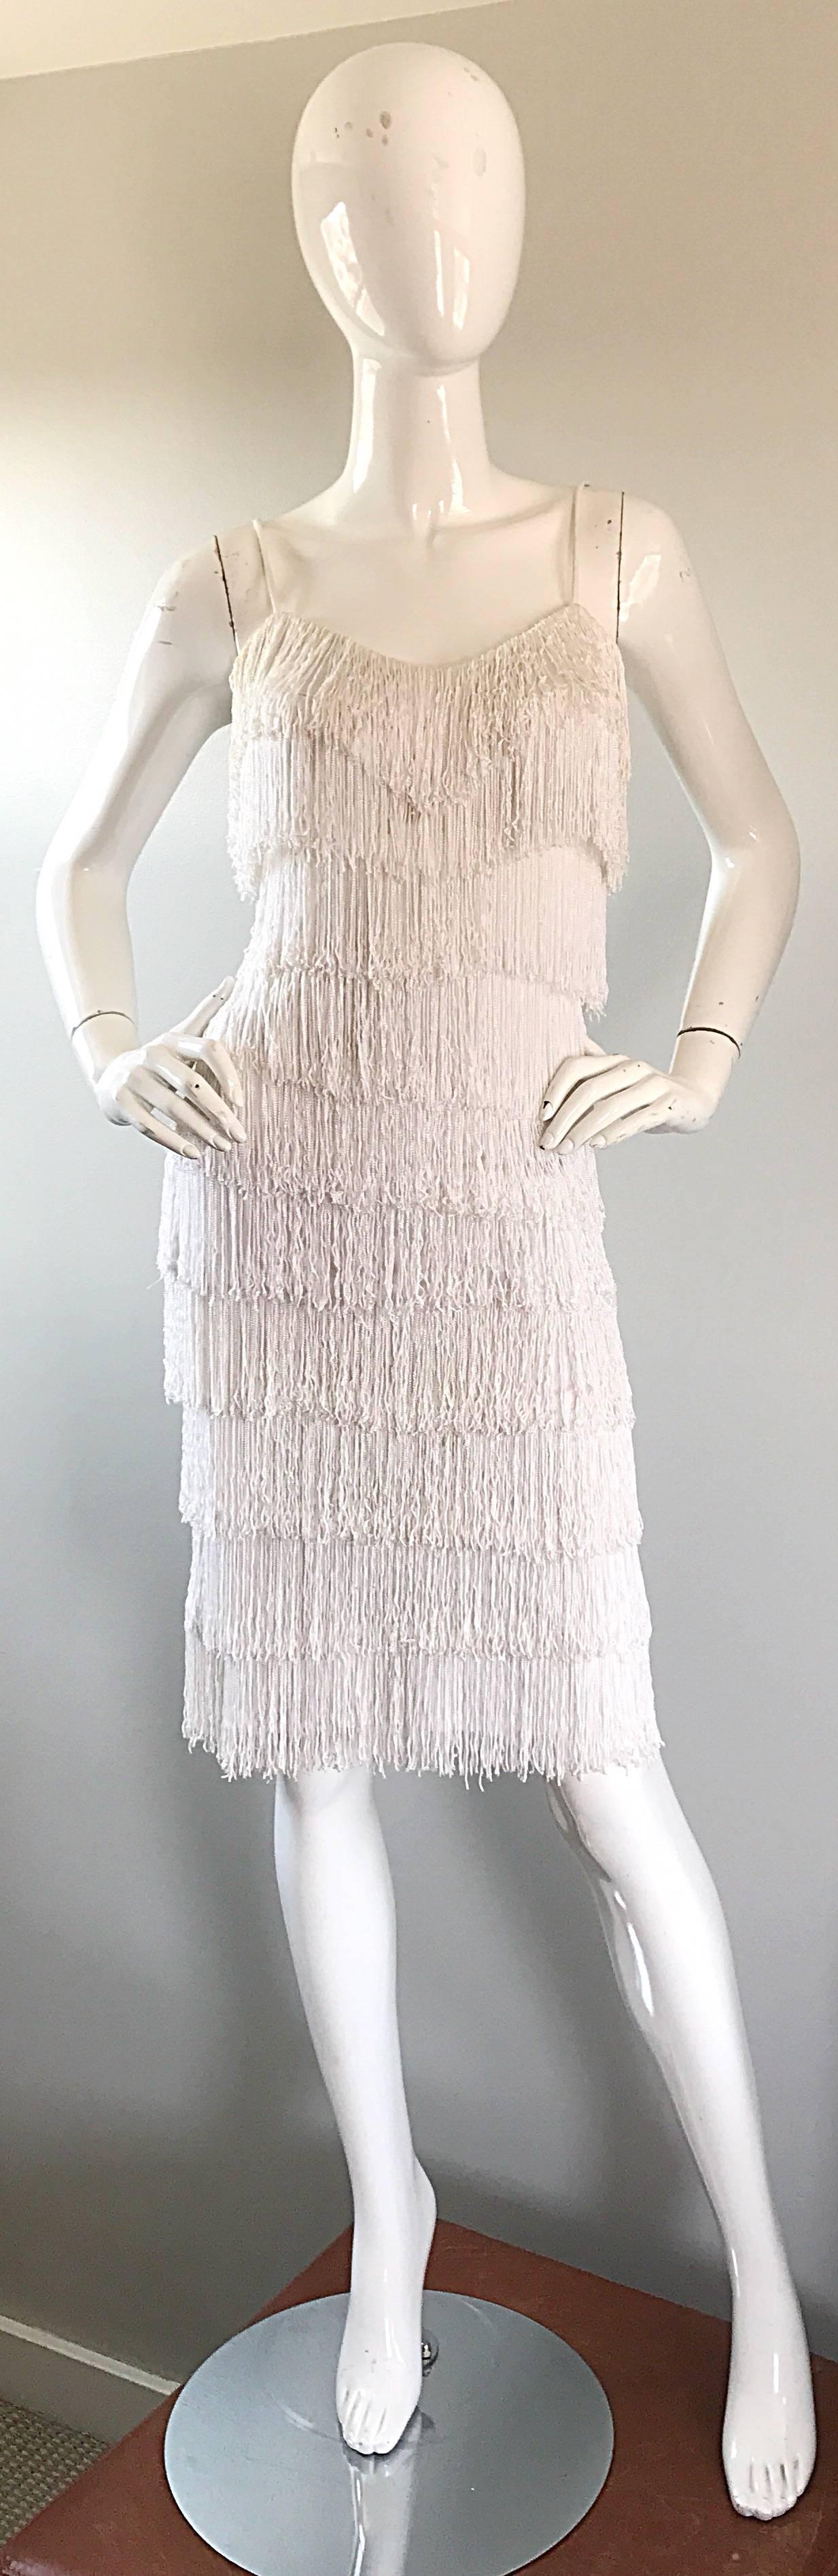 Incredible vintage 70s does 20s fully fringed white jersey dress! Features panels of hand-sewn fringe throughout the entire dress....looks AMAZING on the dance floor! Hidden zipper up the back with hook-and-eye closure. The perfect statement dress,